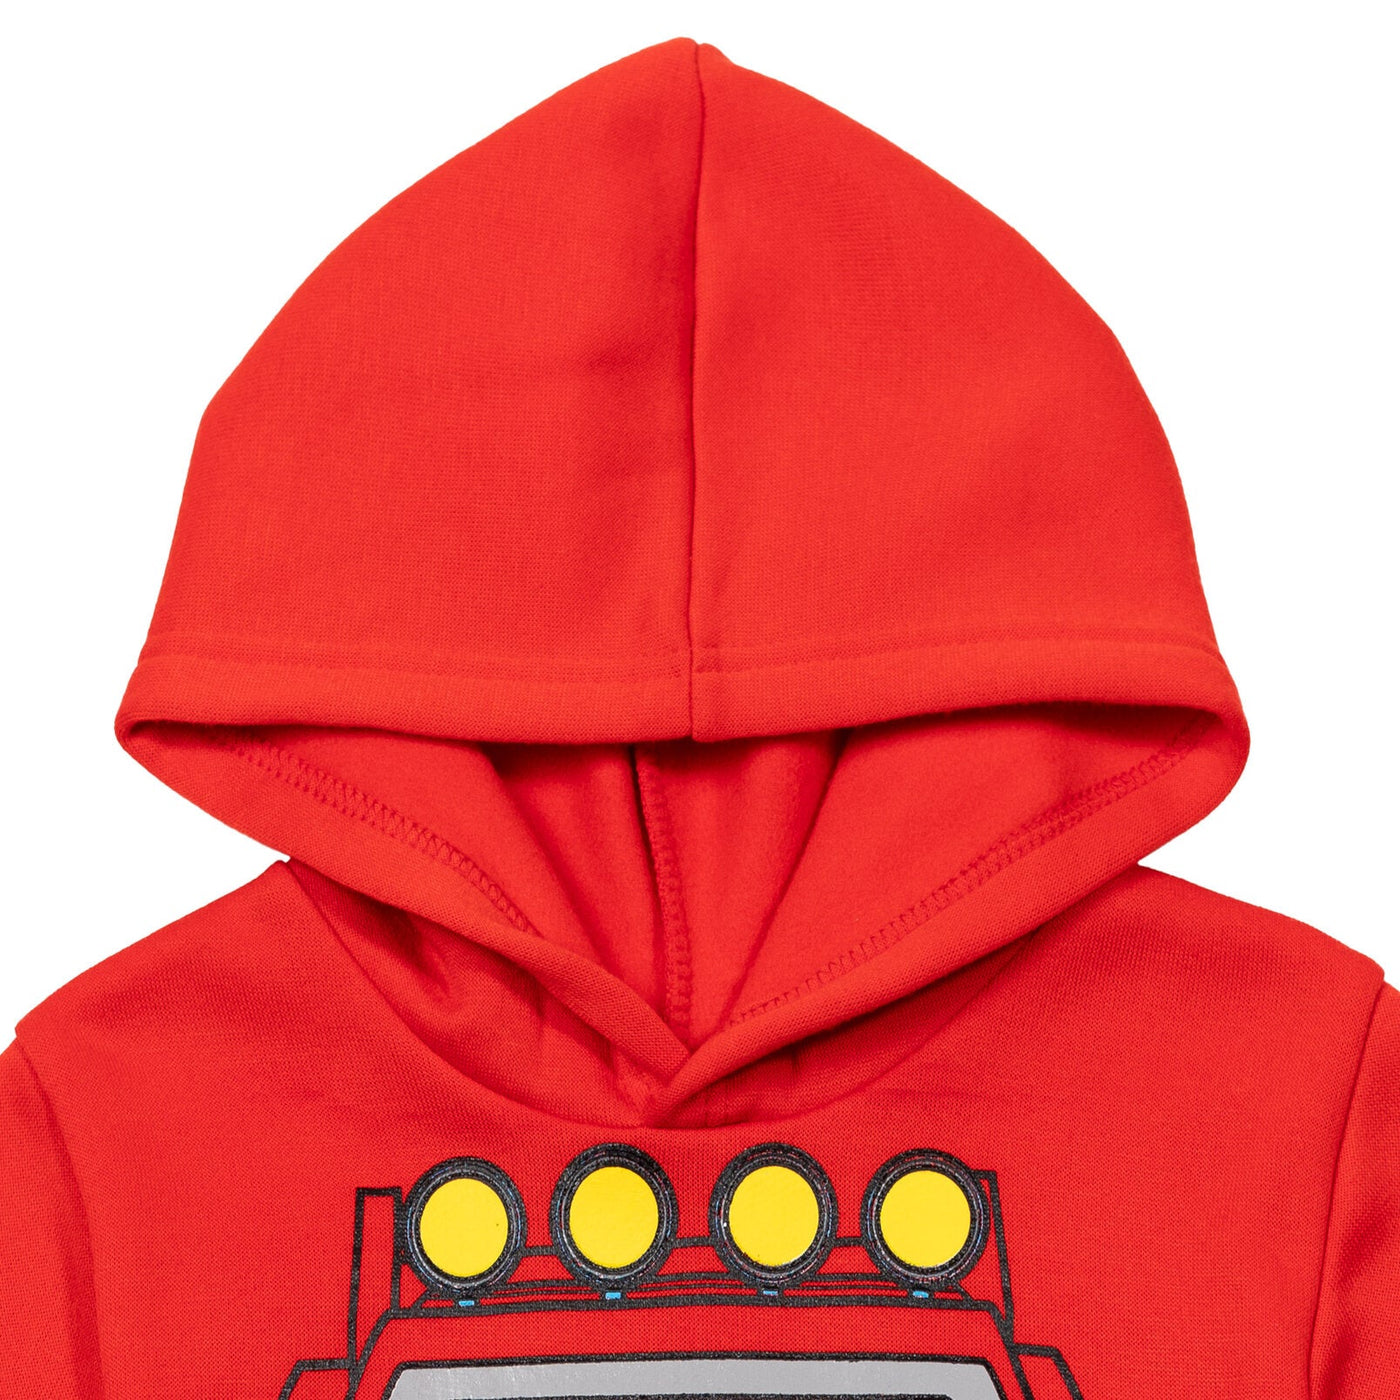 Blaze and the Monster Machines Fleece Pullover Hoodie and Jogger Pants Outfit Set - imagikids